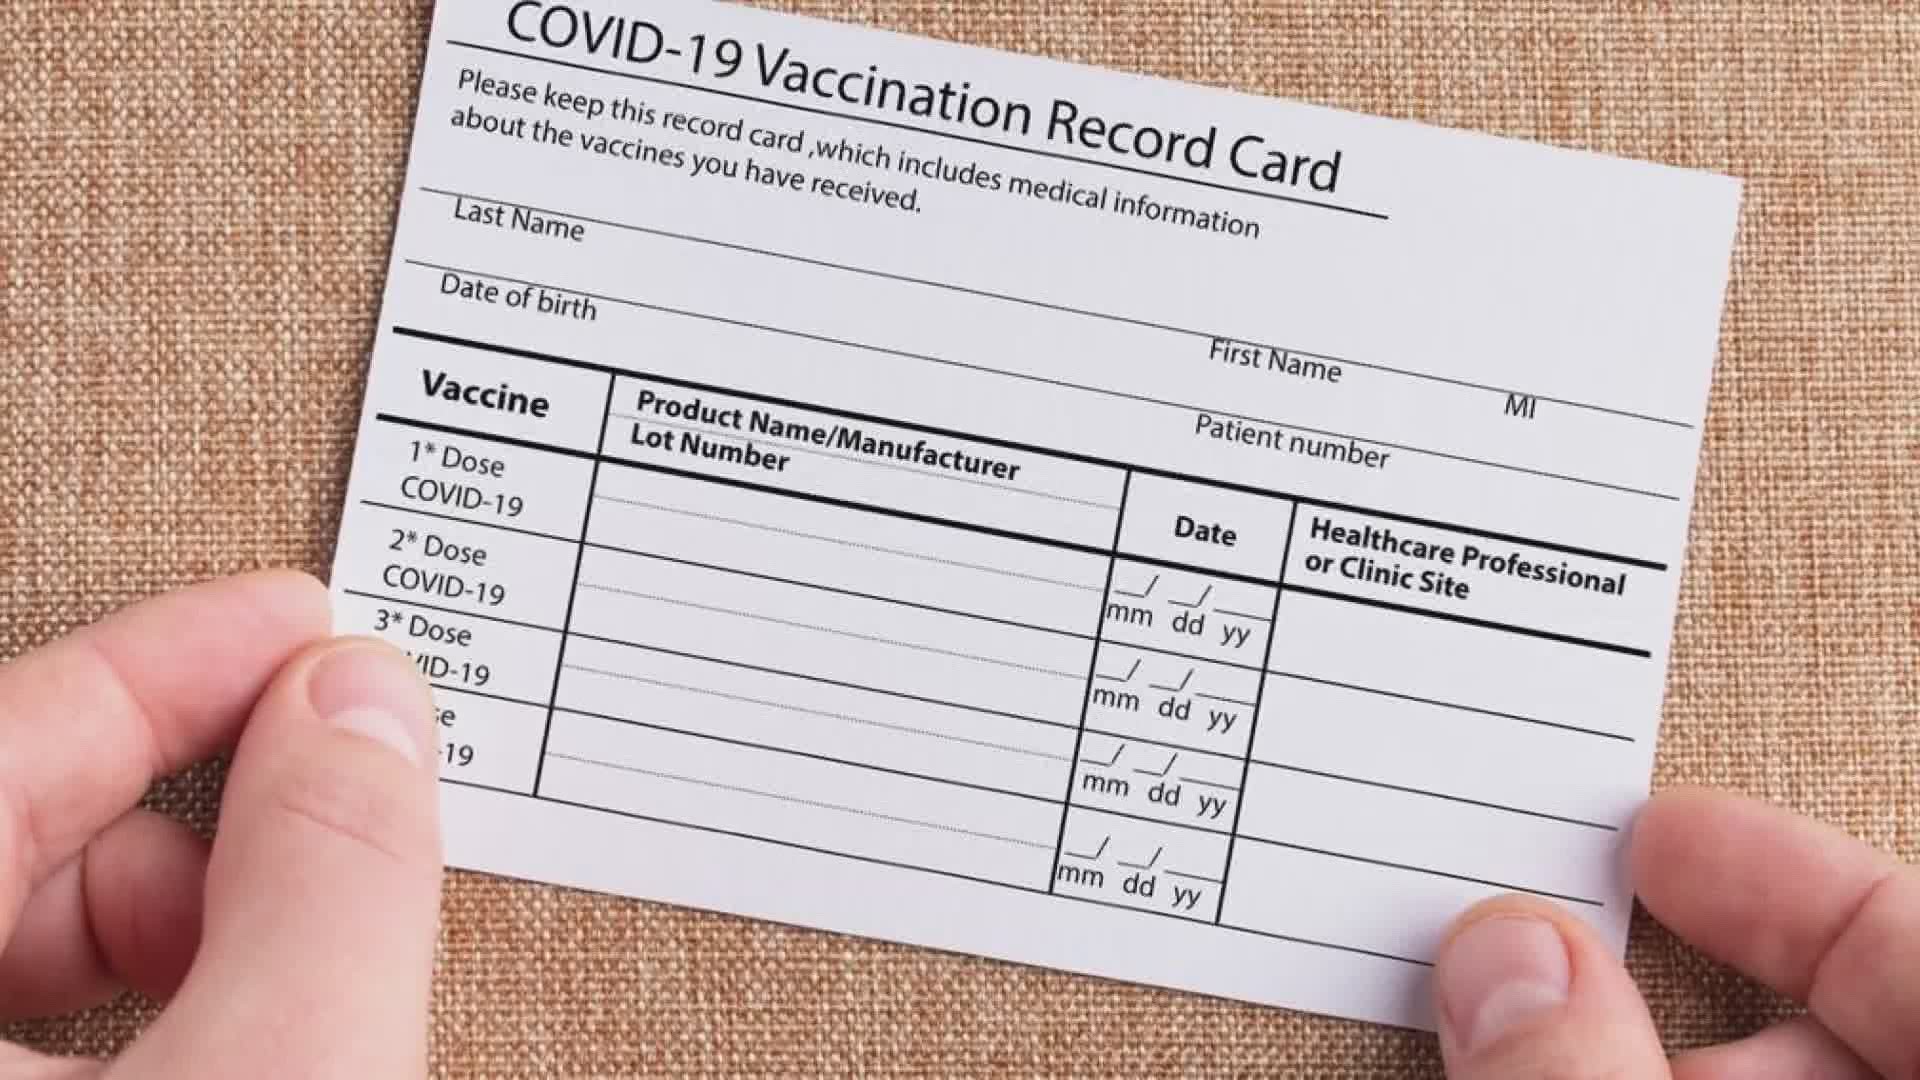 Carrying a fake vaccine card is actually a federal crime. The consequences include potential prison time or fines.